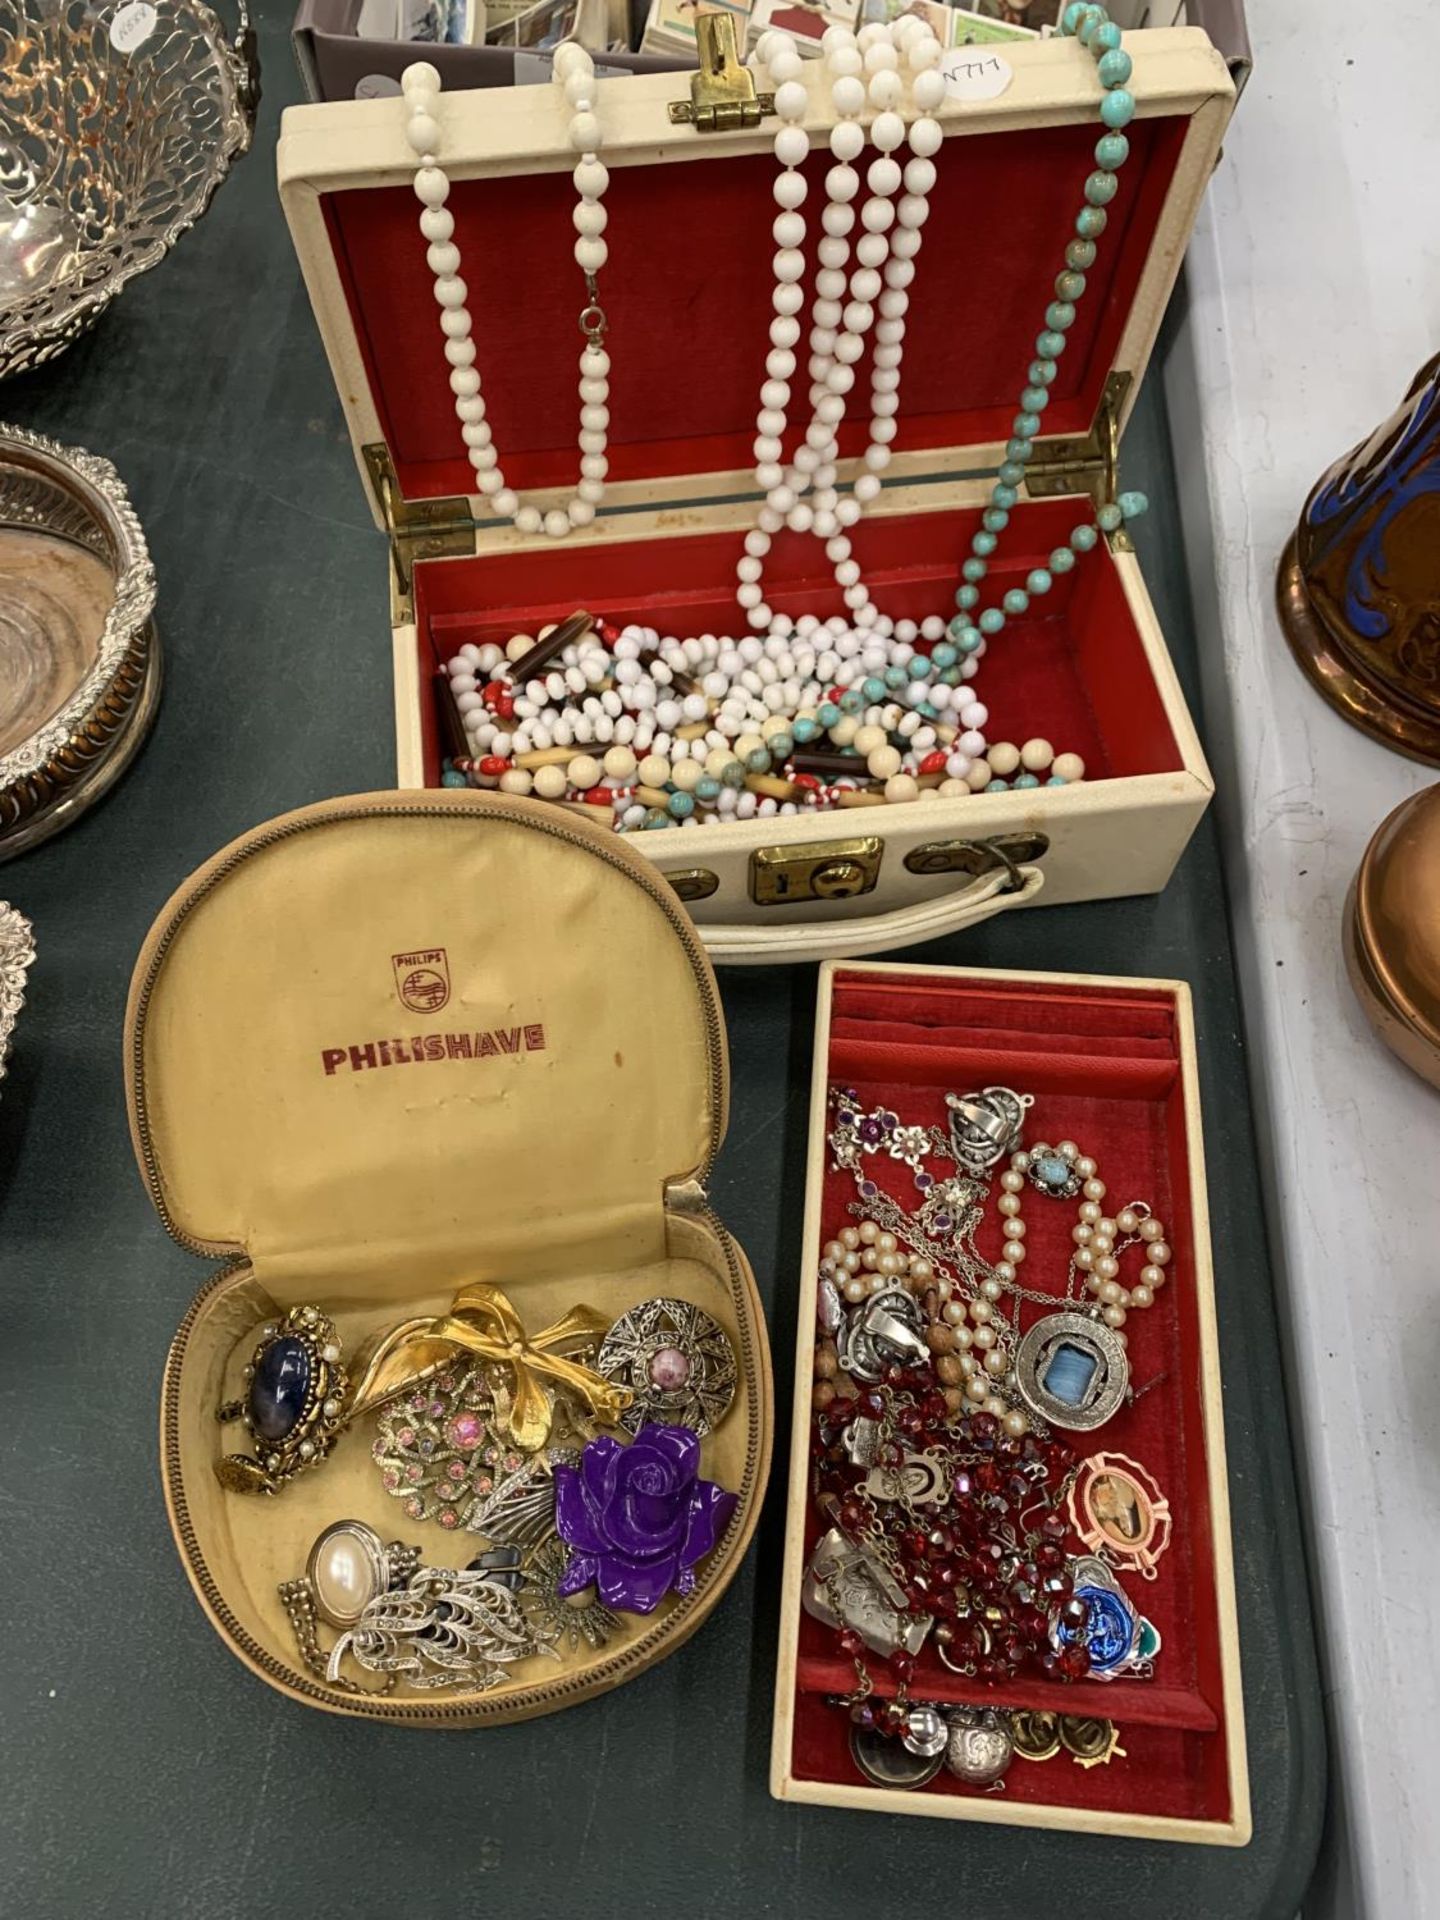 A CREAM JEWELLERY CASE ENCLOSING A NUMBER OF VINTAGE COSTUME JEWELLERY PIECES AND A SECOND CASE OF